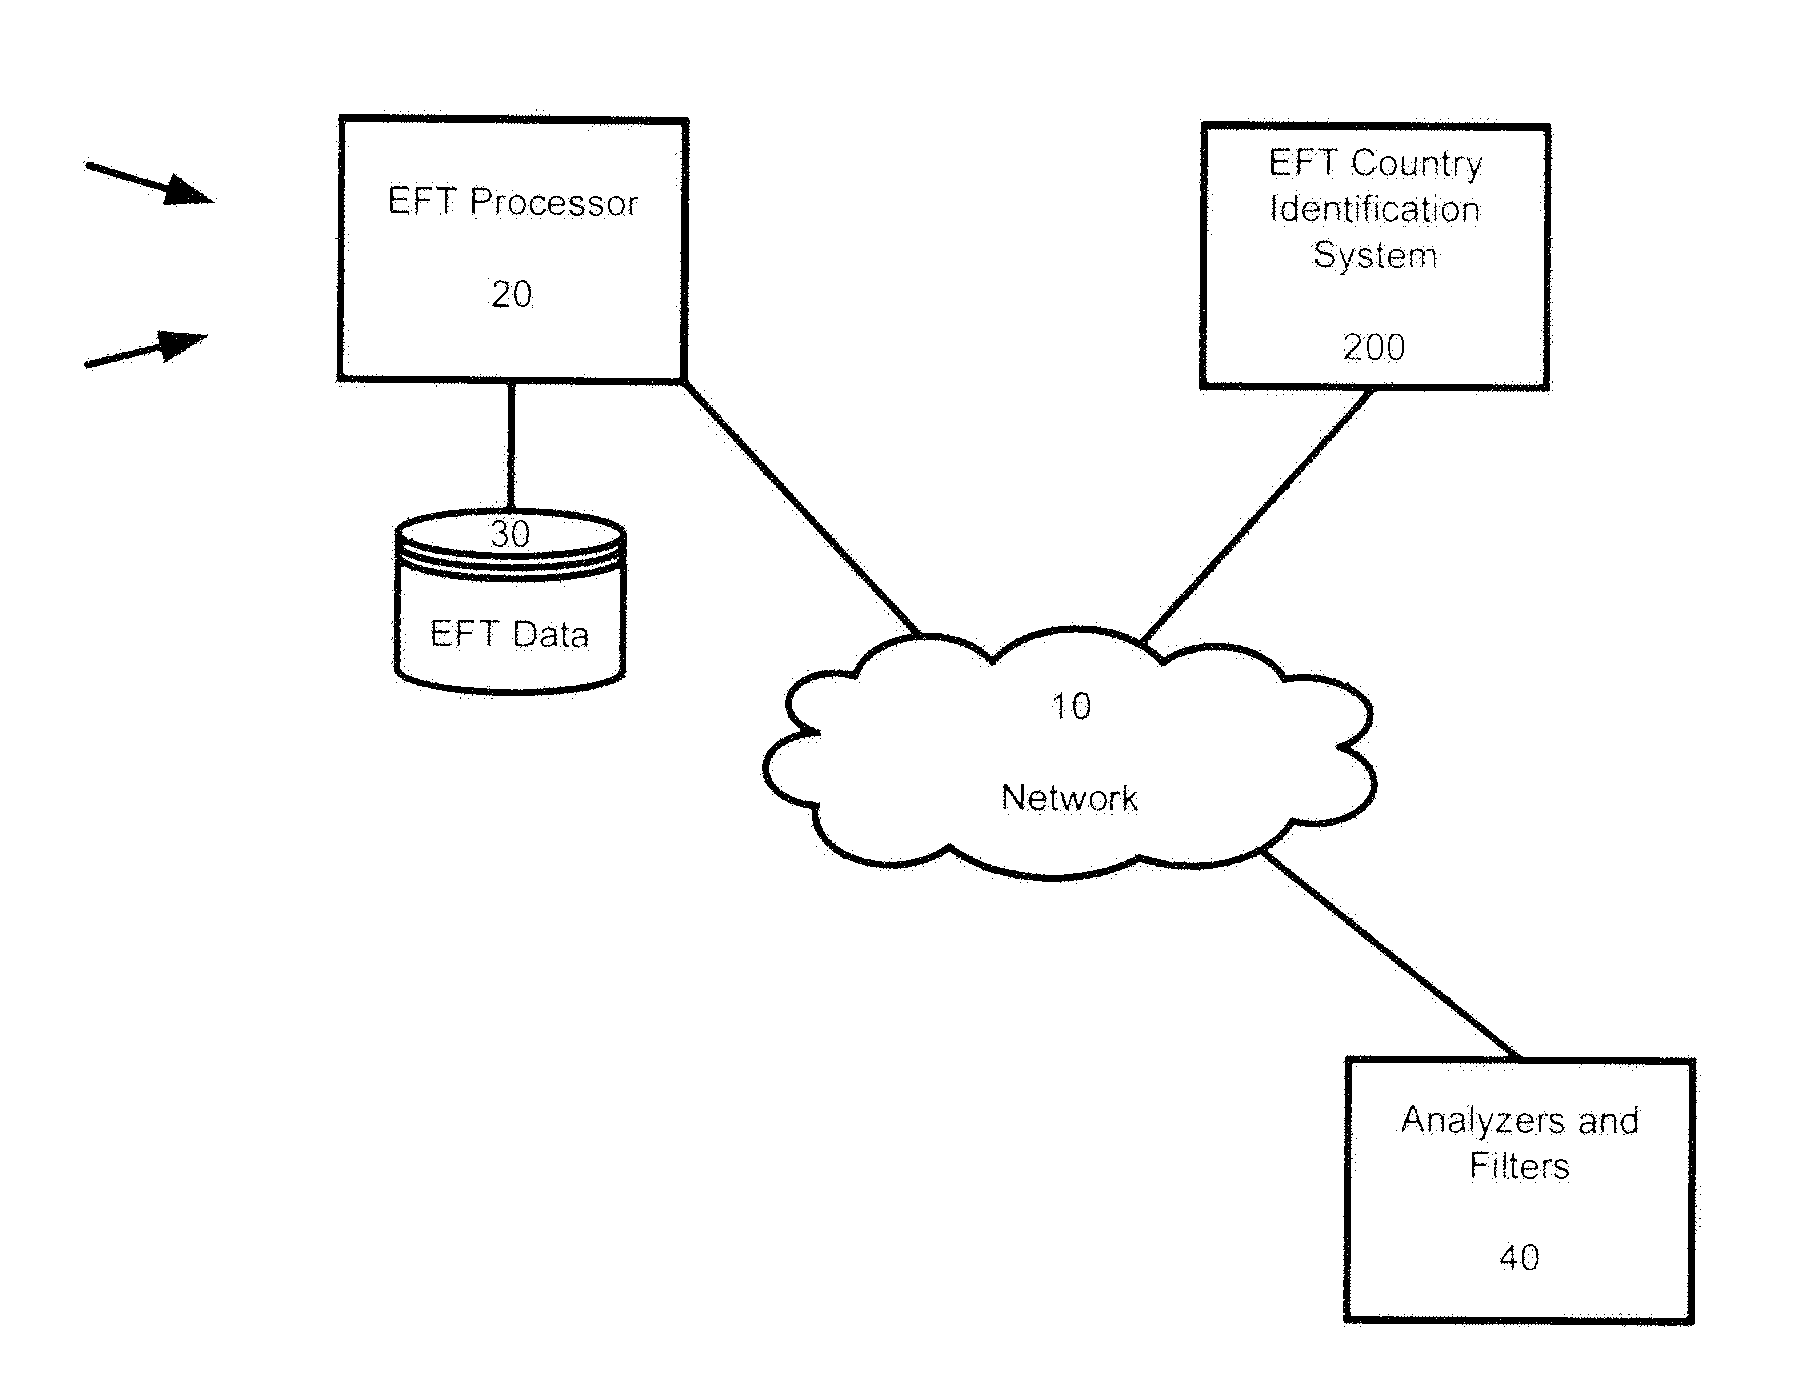 System and Method for Risk Evaluation in EFT Transactions